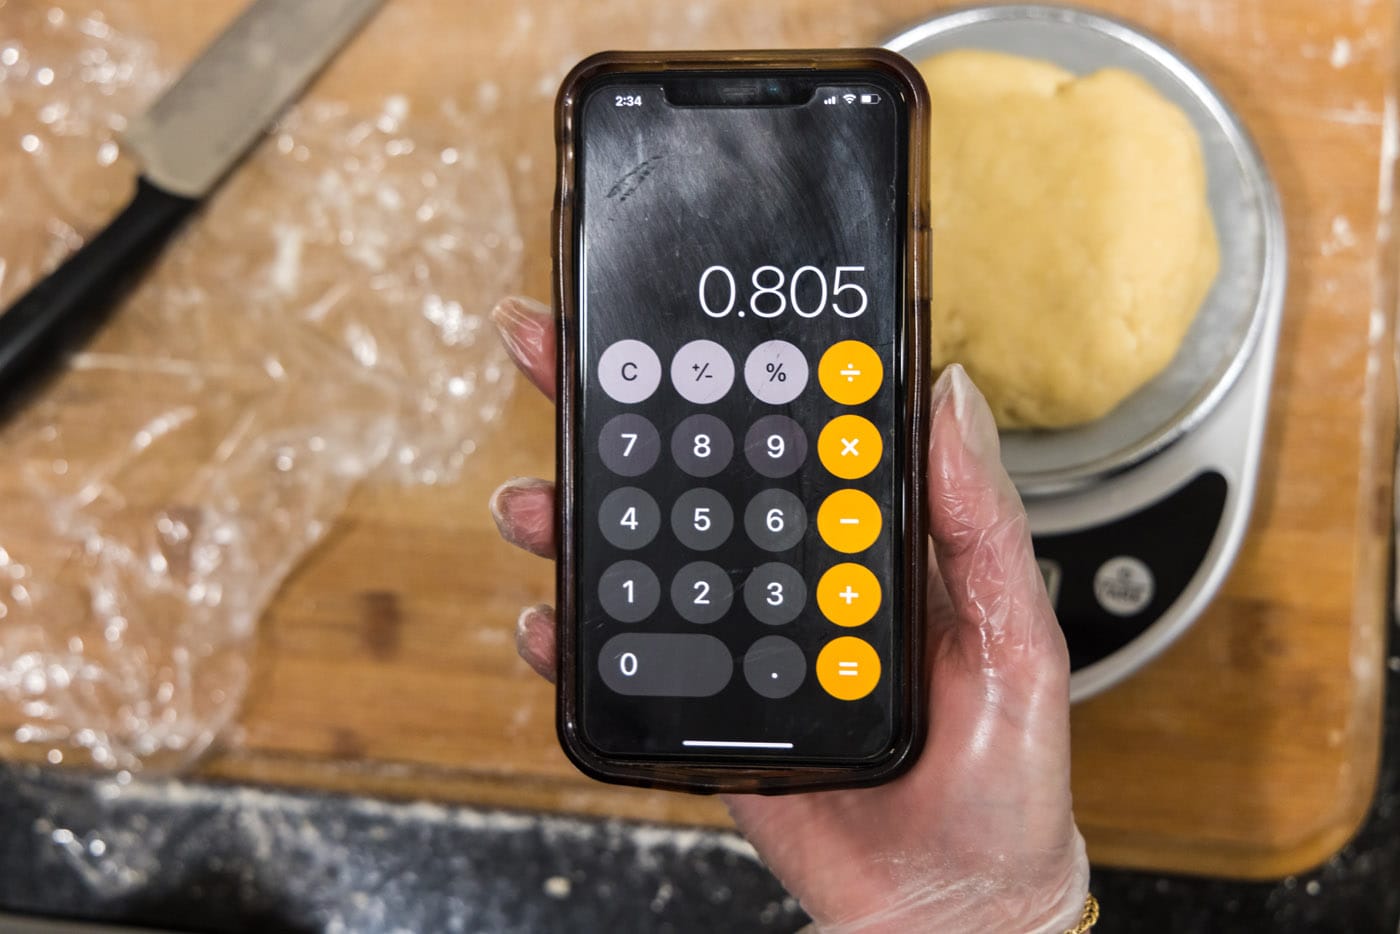 dough on a scale with phone calculator showing weight